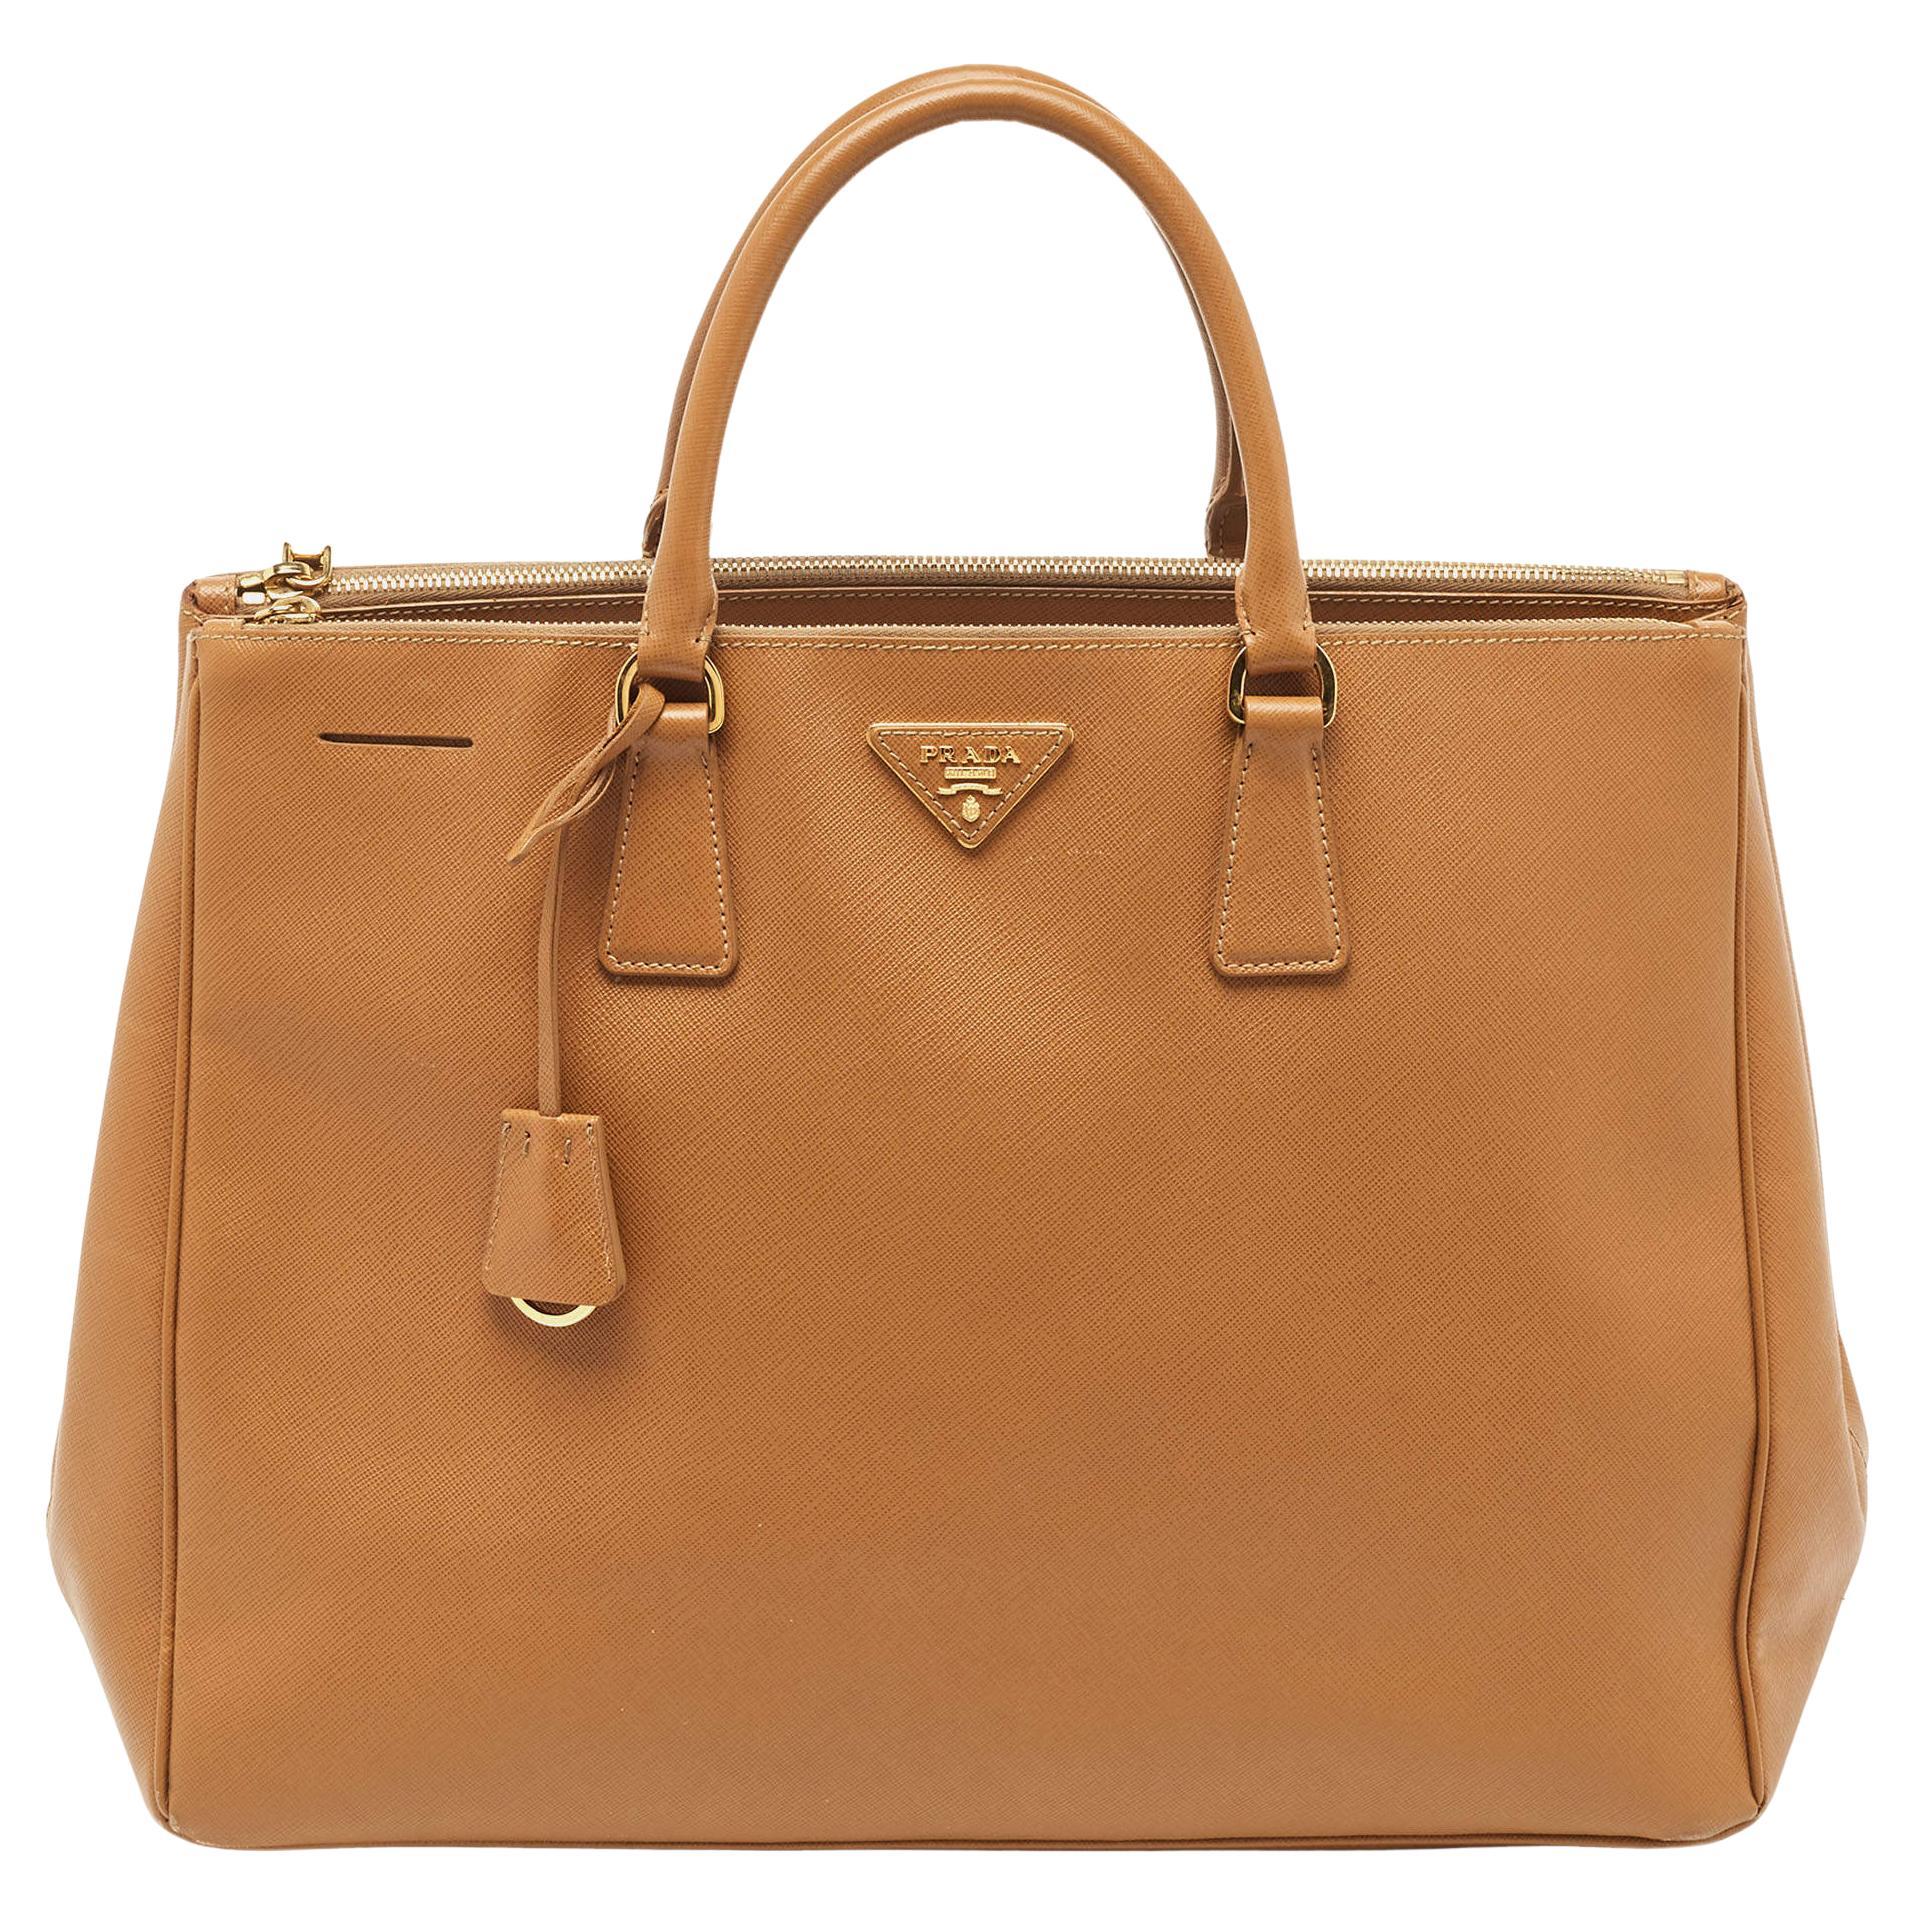 Prada Camel Brown Saffiano Lux Leather Extra Large Double Zip Tote